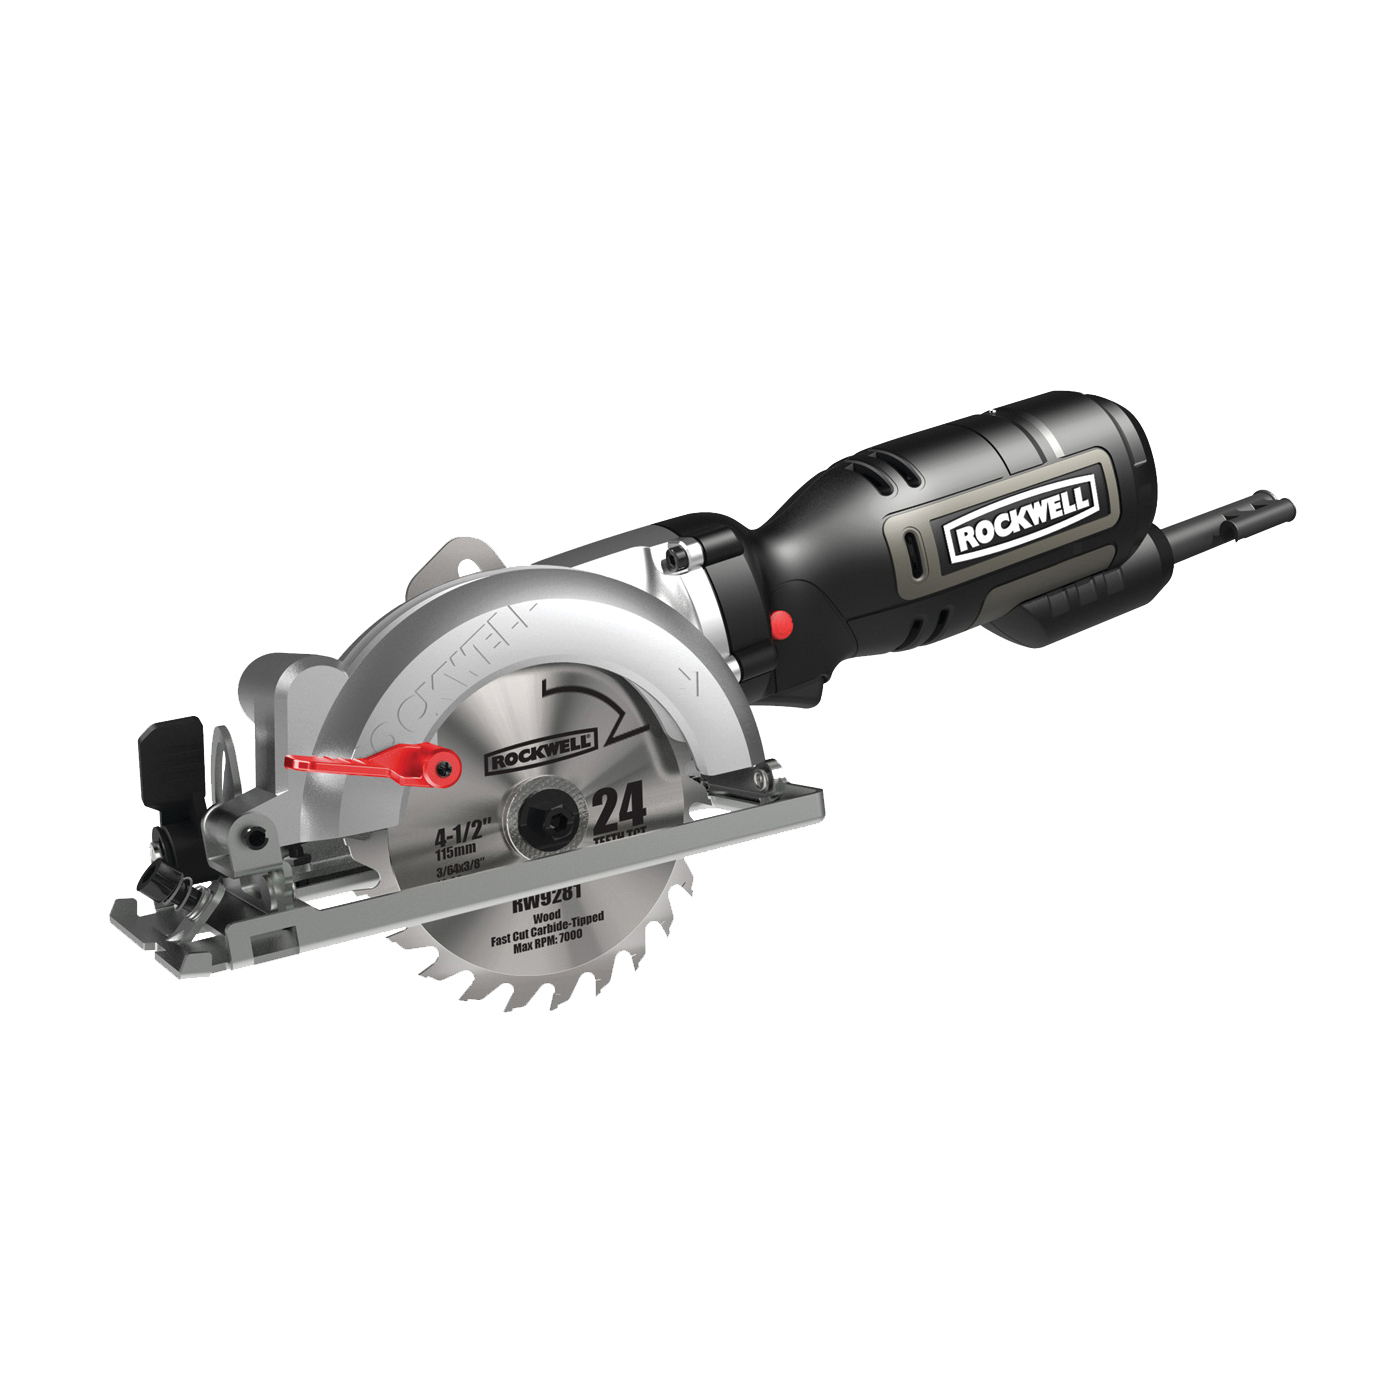 Buy Rockwell RK3441K Circular Saw, A, 4-1/8 in Dia Blade, 3/8 in Arbor,  1-1/8 in at 45 deg, 1-11/16 in at 90 deg D Cutting